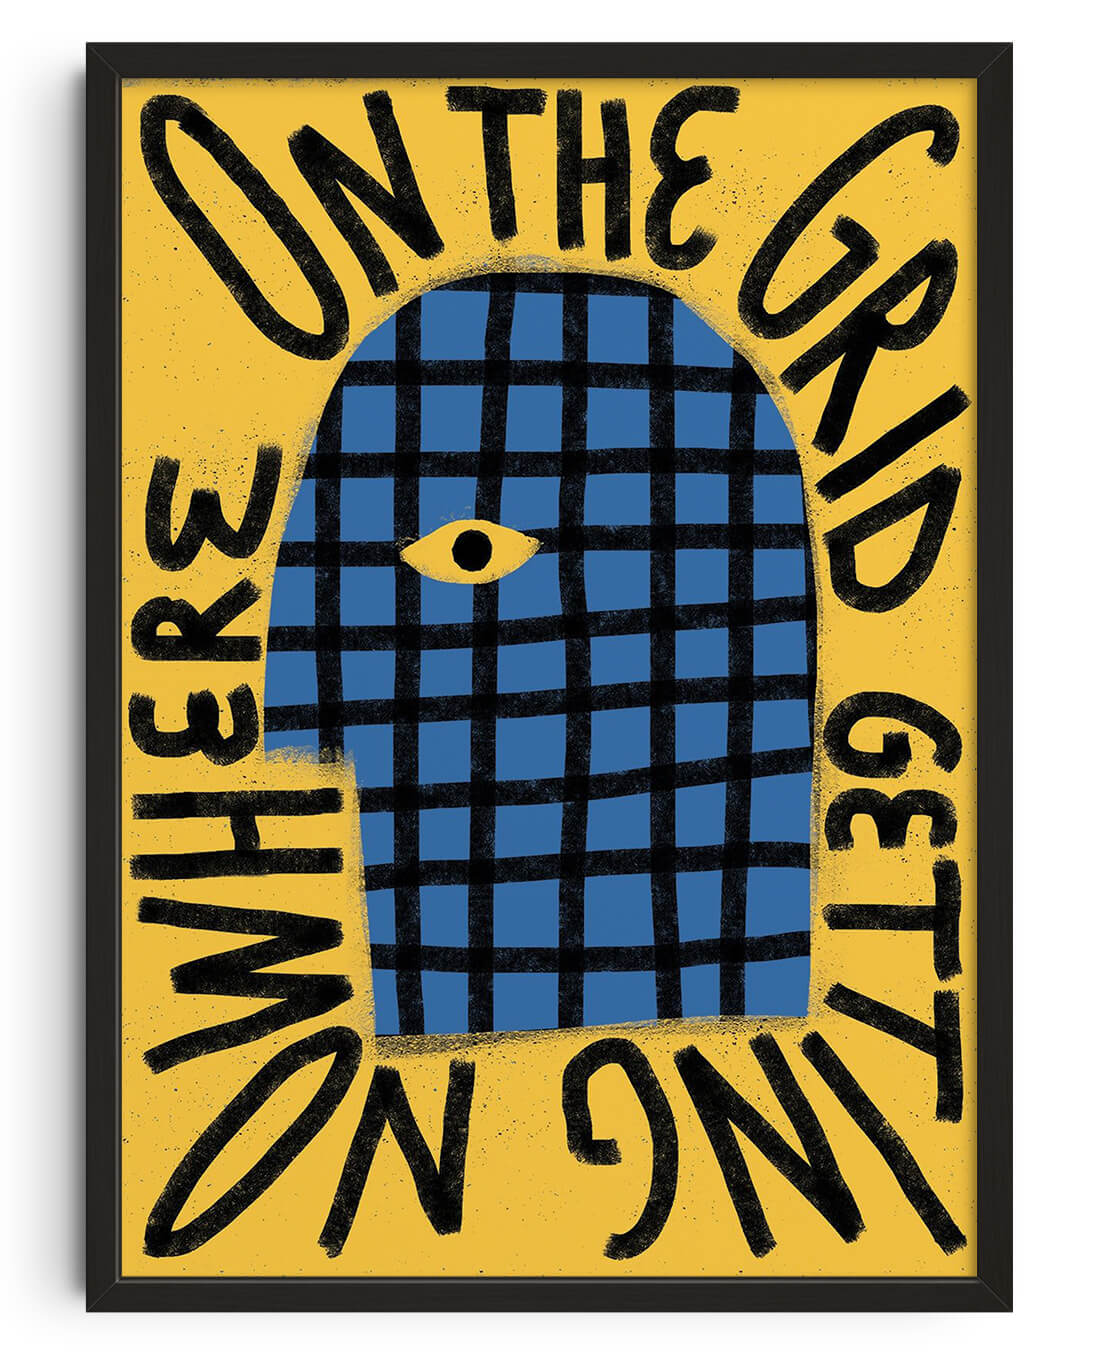 On The Grid Getting Nowhere contemporary wall art print by Carilla Karahan - sold by DROOL